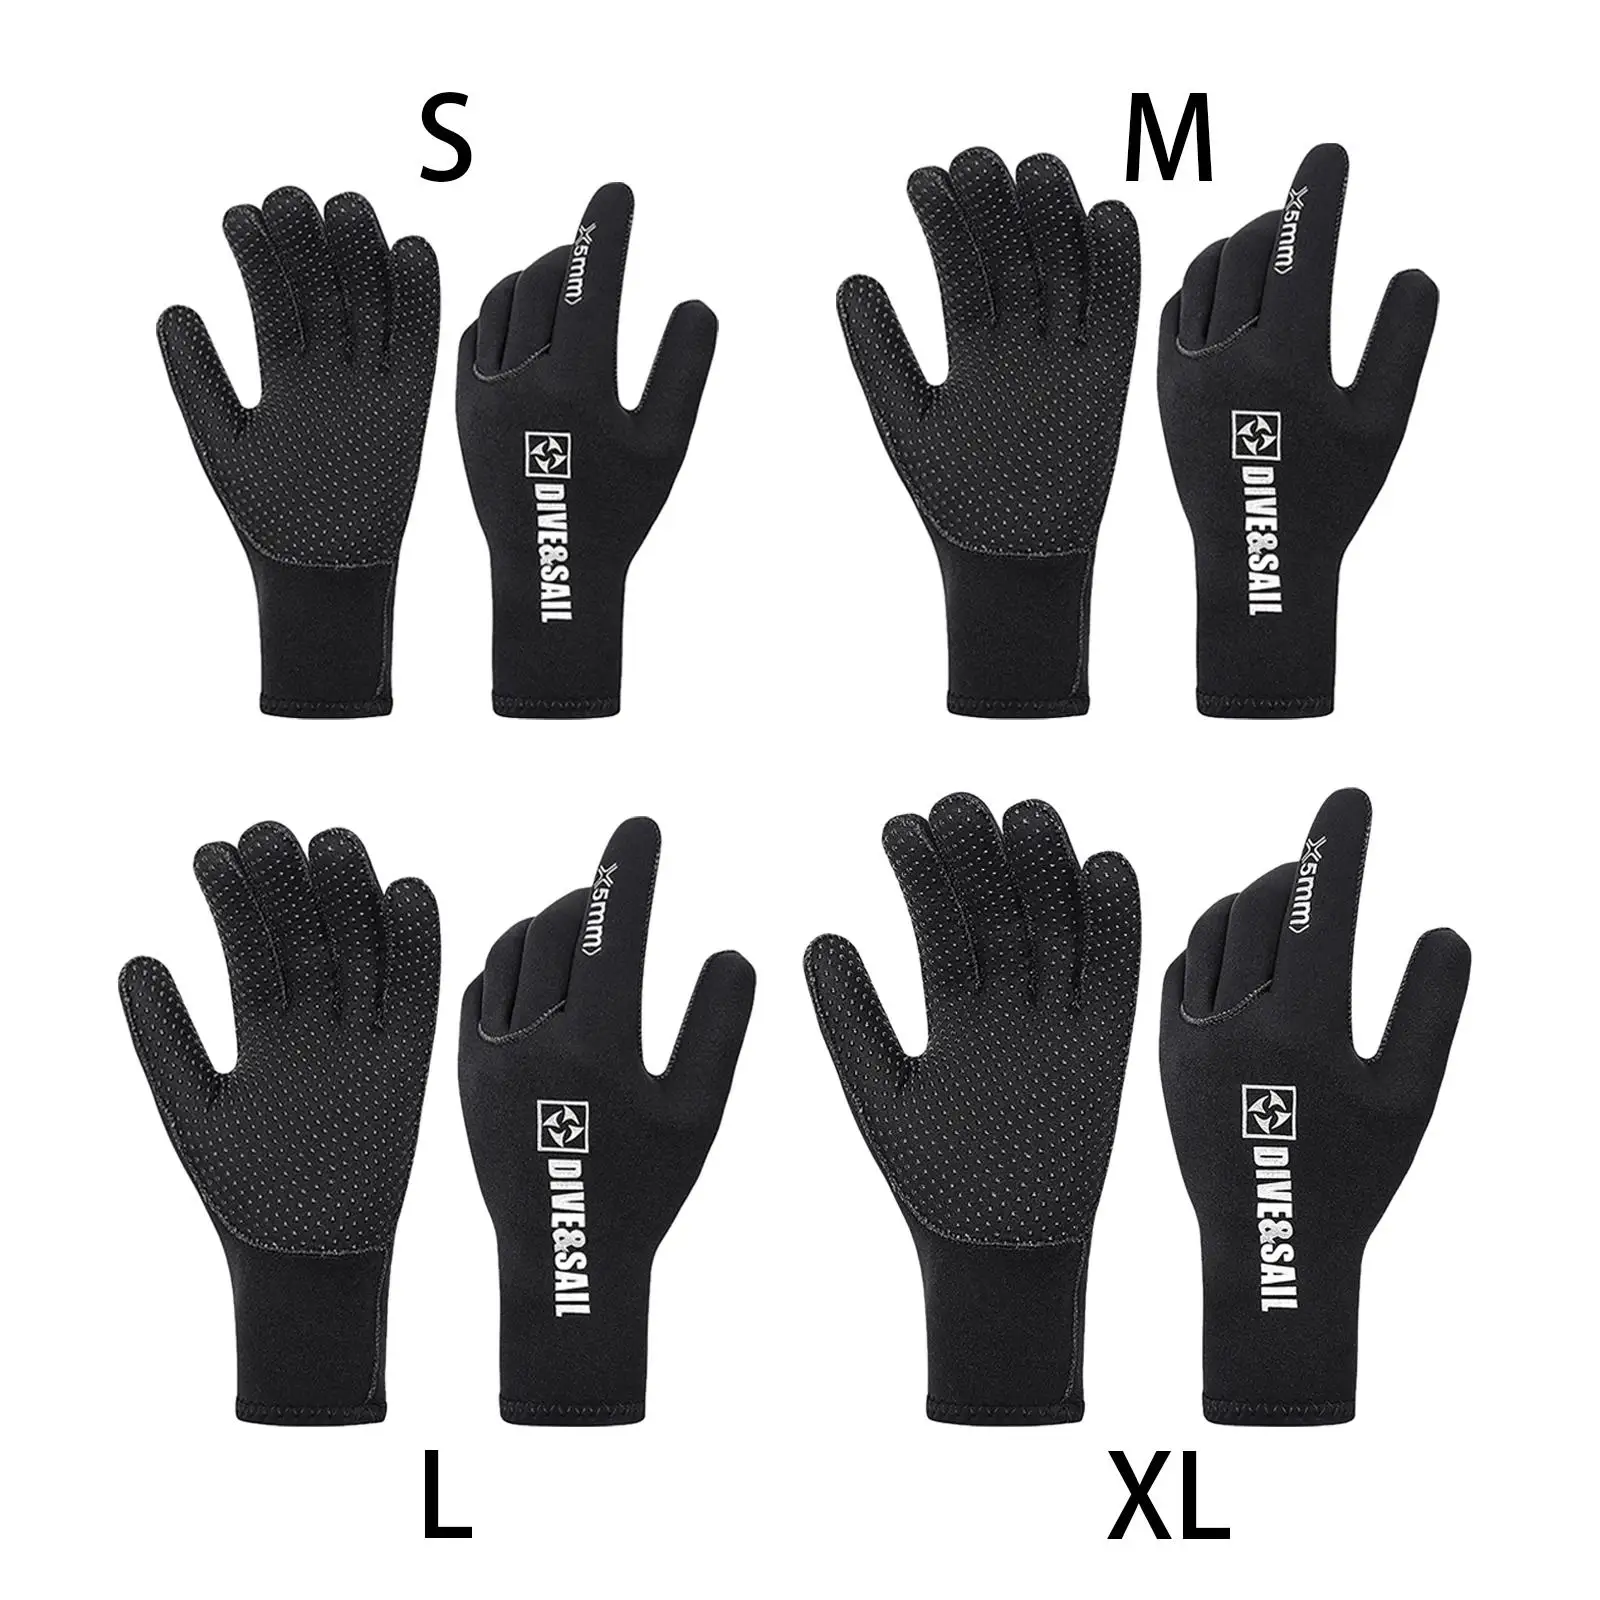 5MM Neoprene Swimming Gloves Snorkeling Equipment Anti Scratch Keep Warm Wetsuit Gloves for Swimming Spearfishing Water Sports